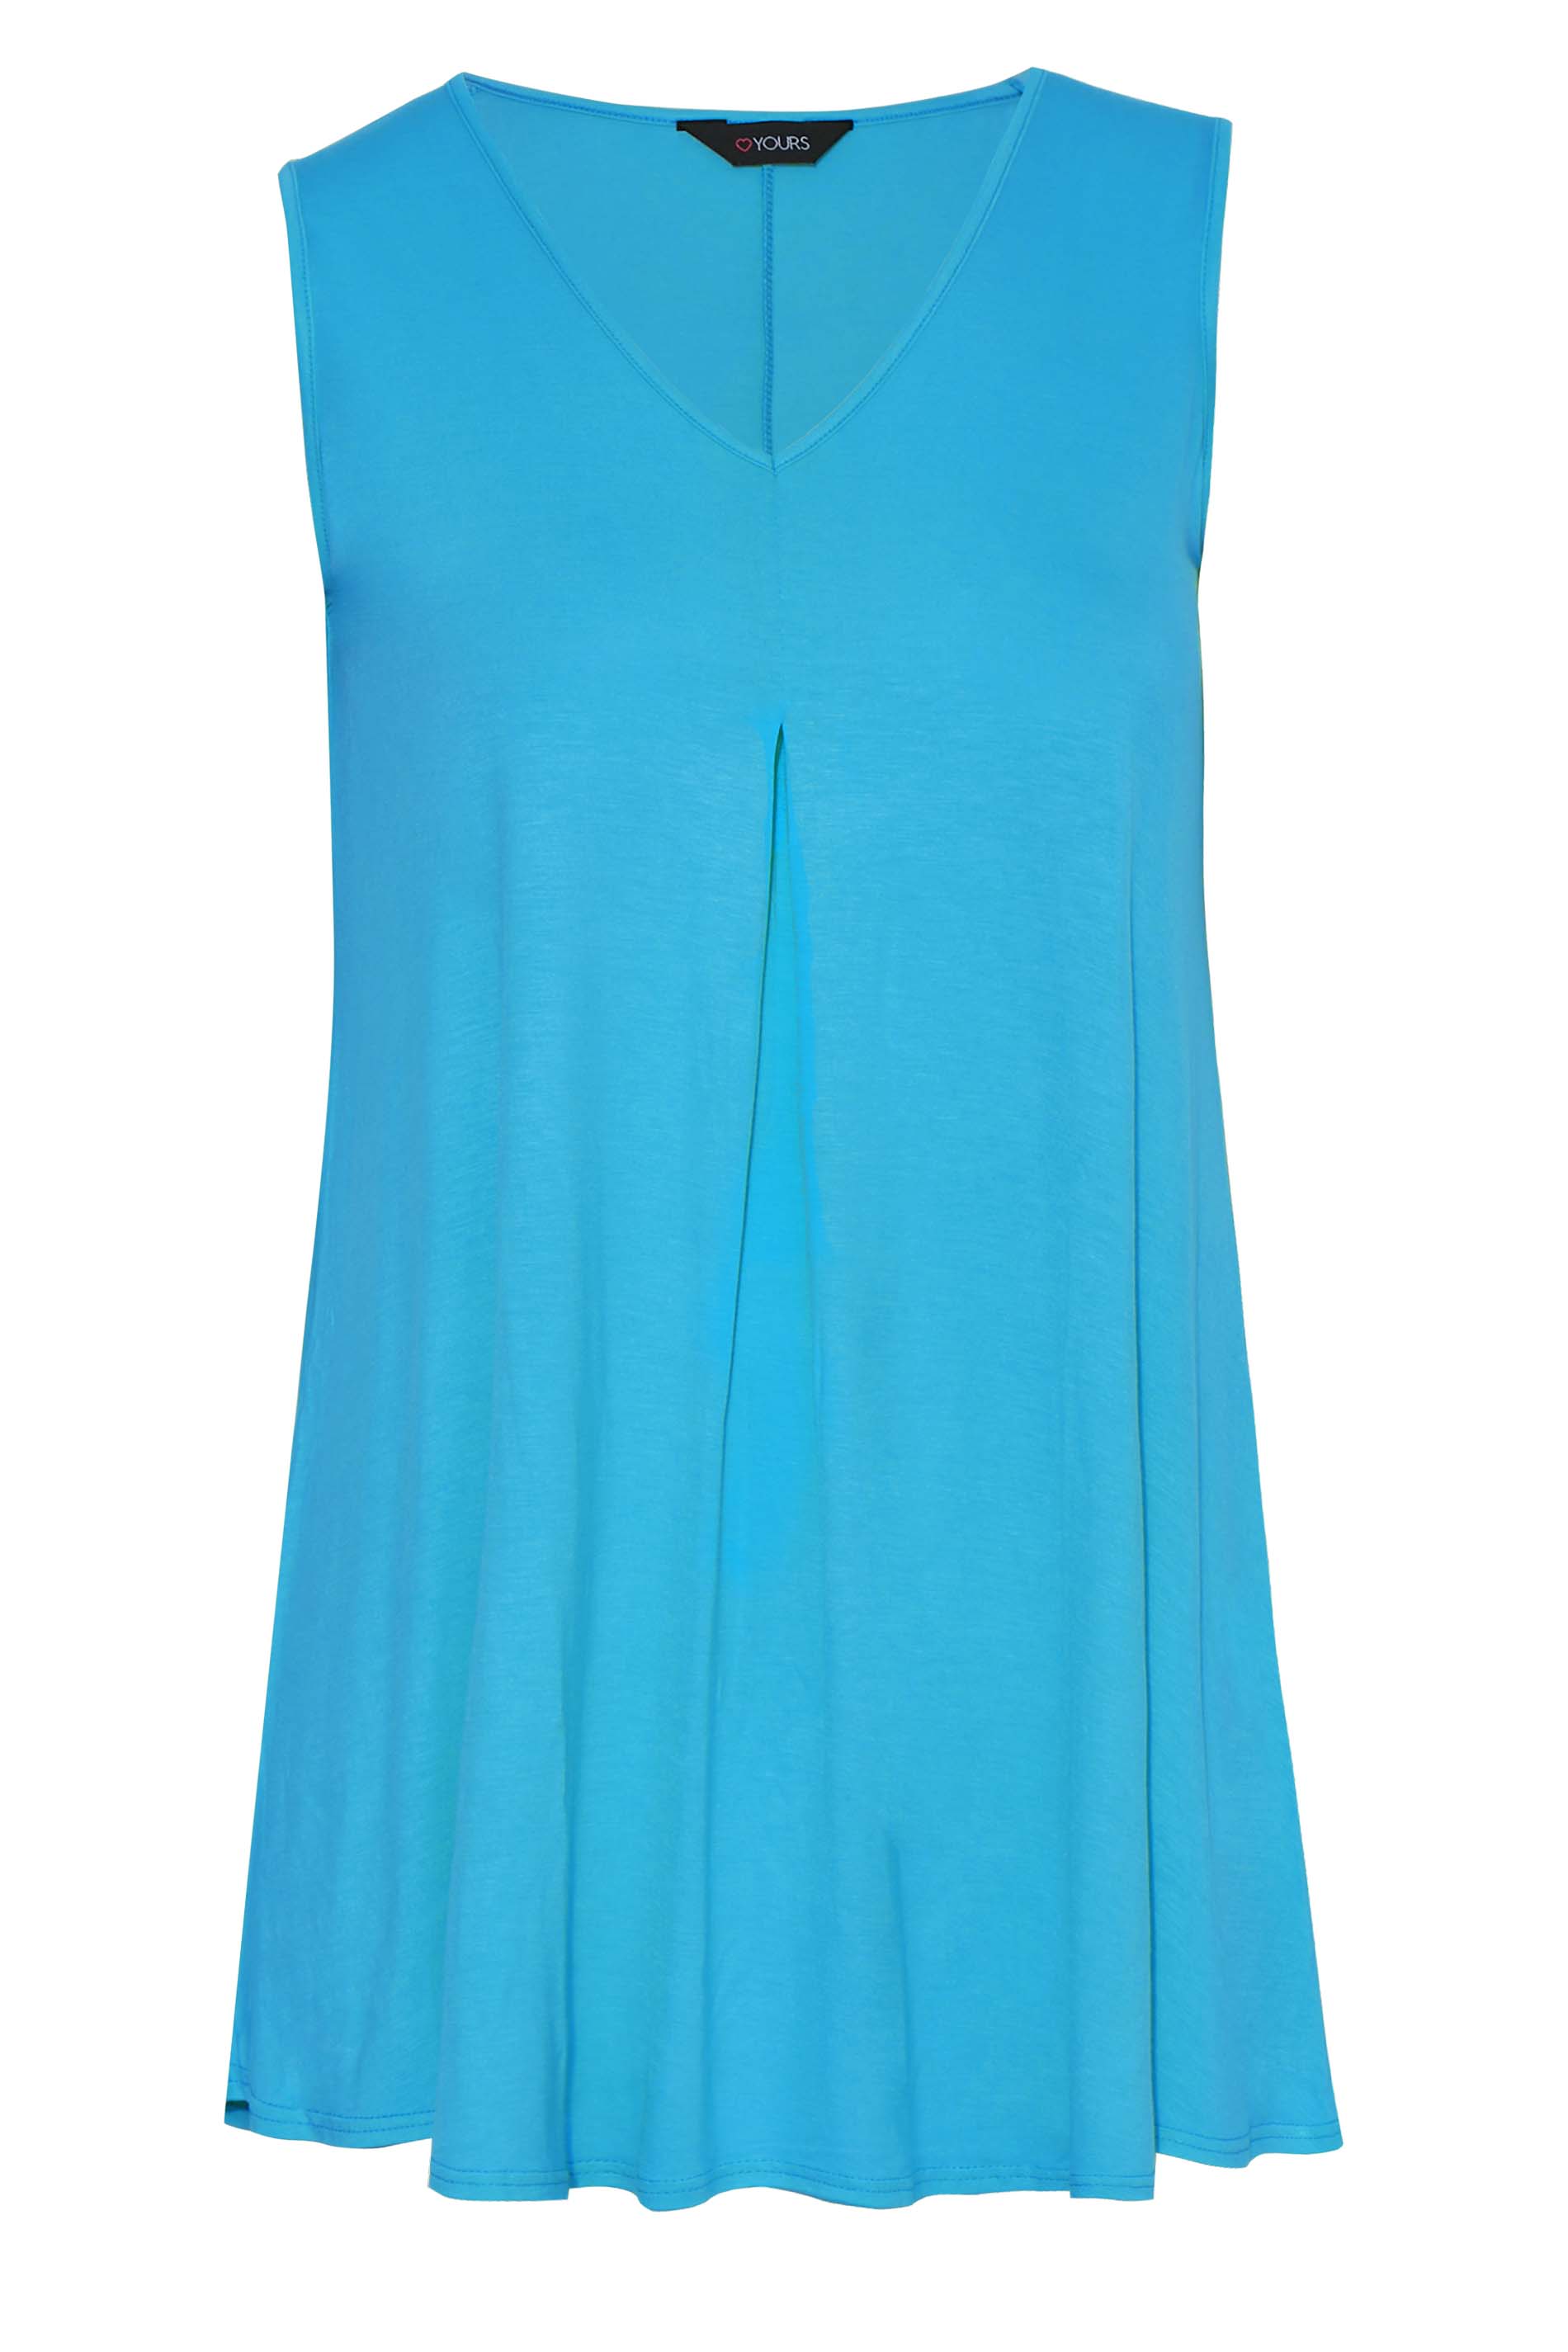 Grande taille  Tops Grande taille  Tops Casual | Curve Turquoise Blue Swing Vest Top - ZS03221